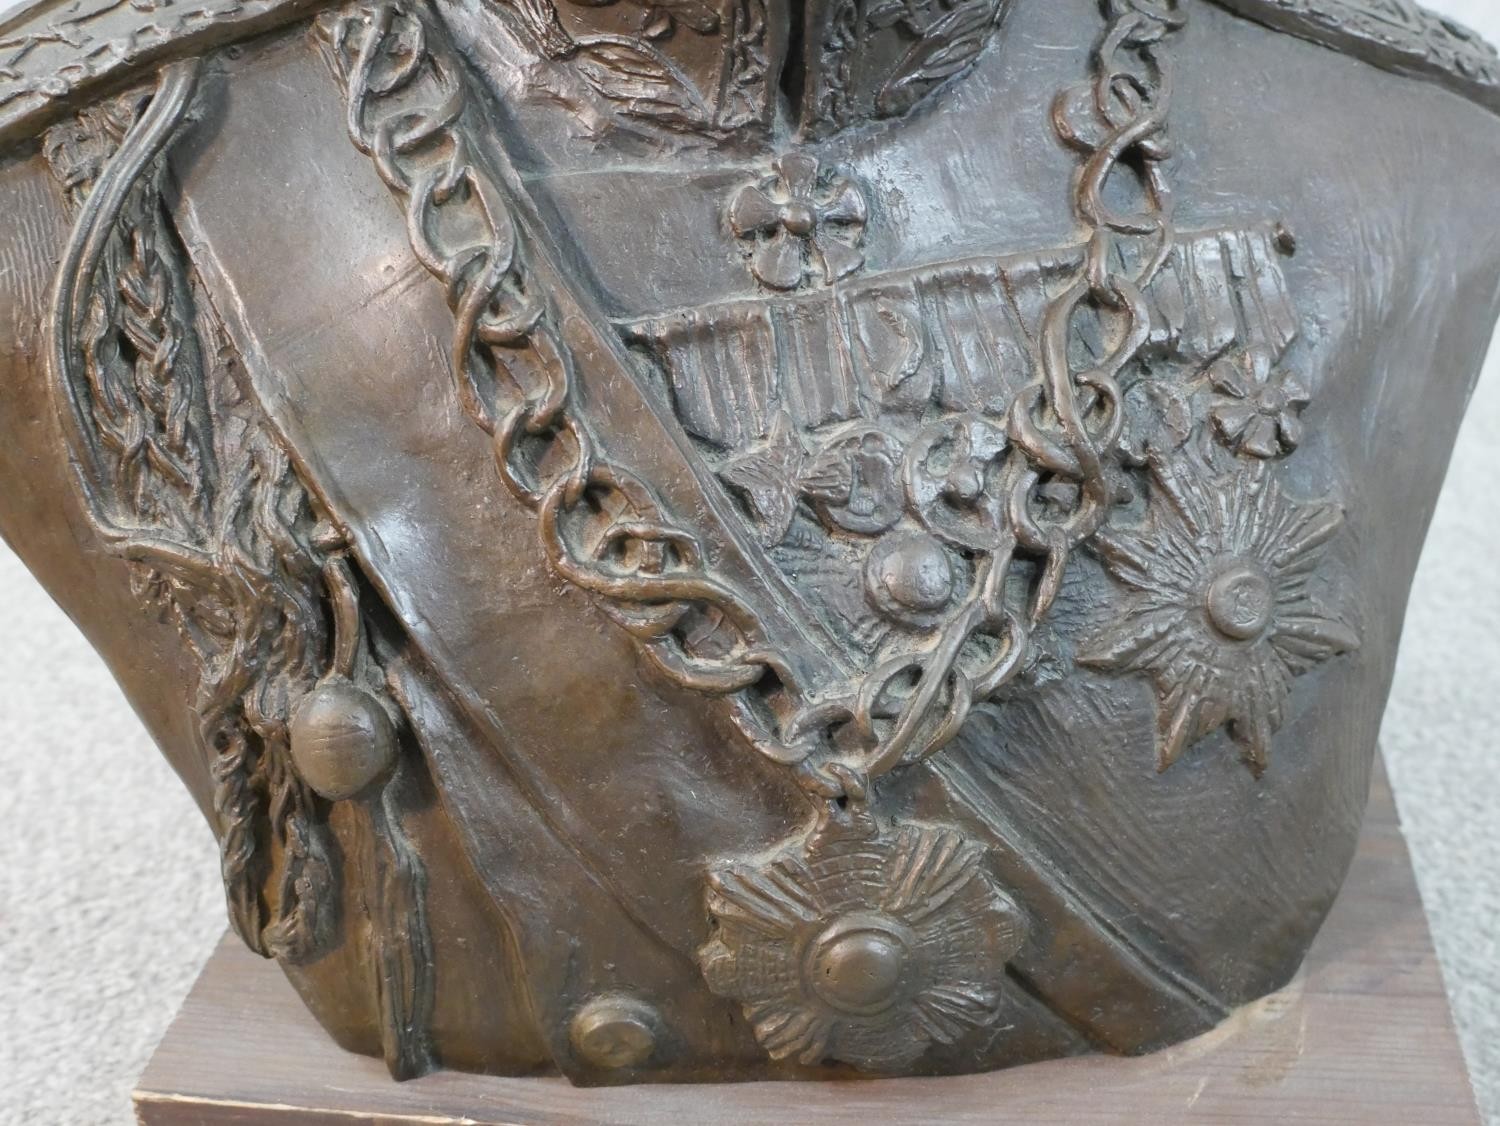 A cast bronze portrait bust of Persian Shah Mohammad Reza Pahlavi in military uniform, mounted on - Image 6 of 9